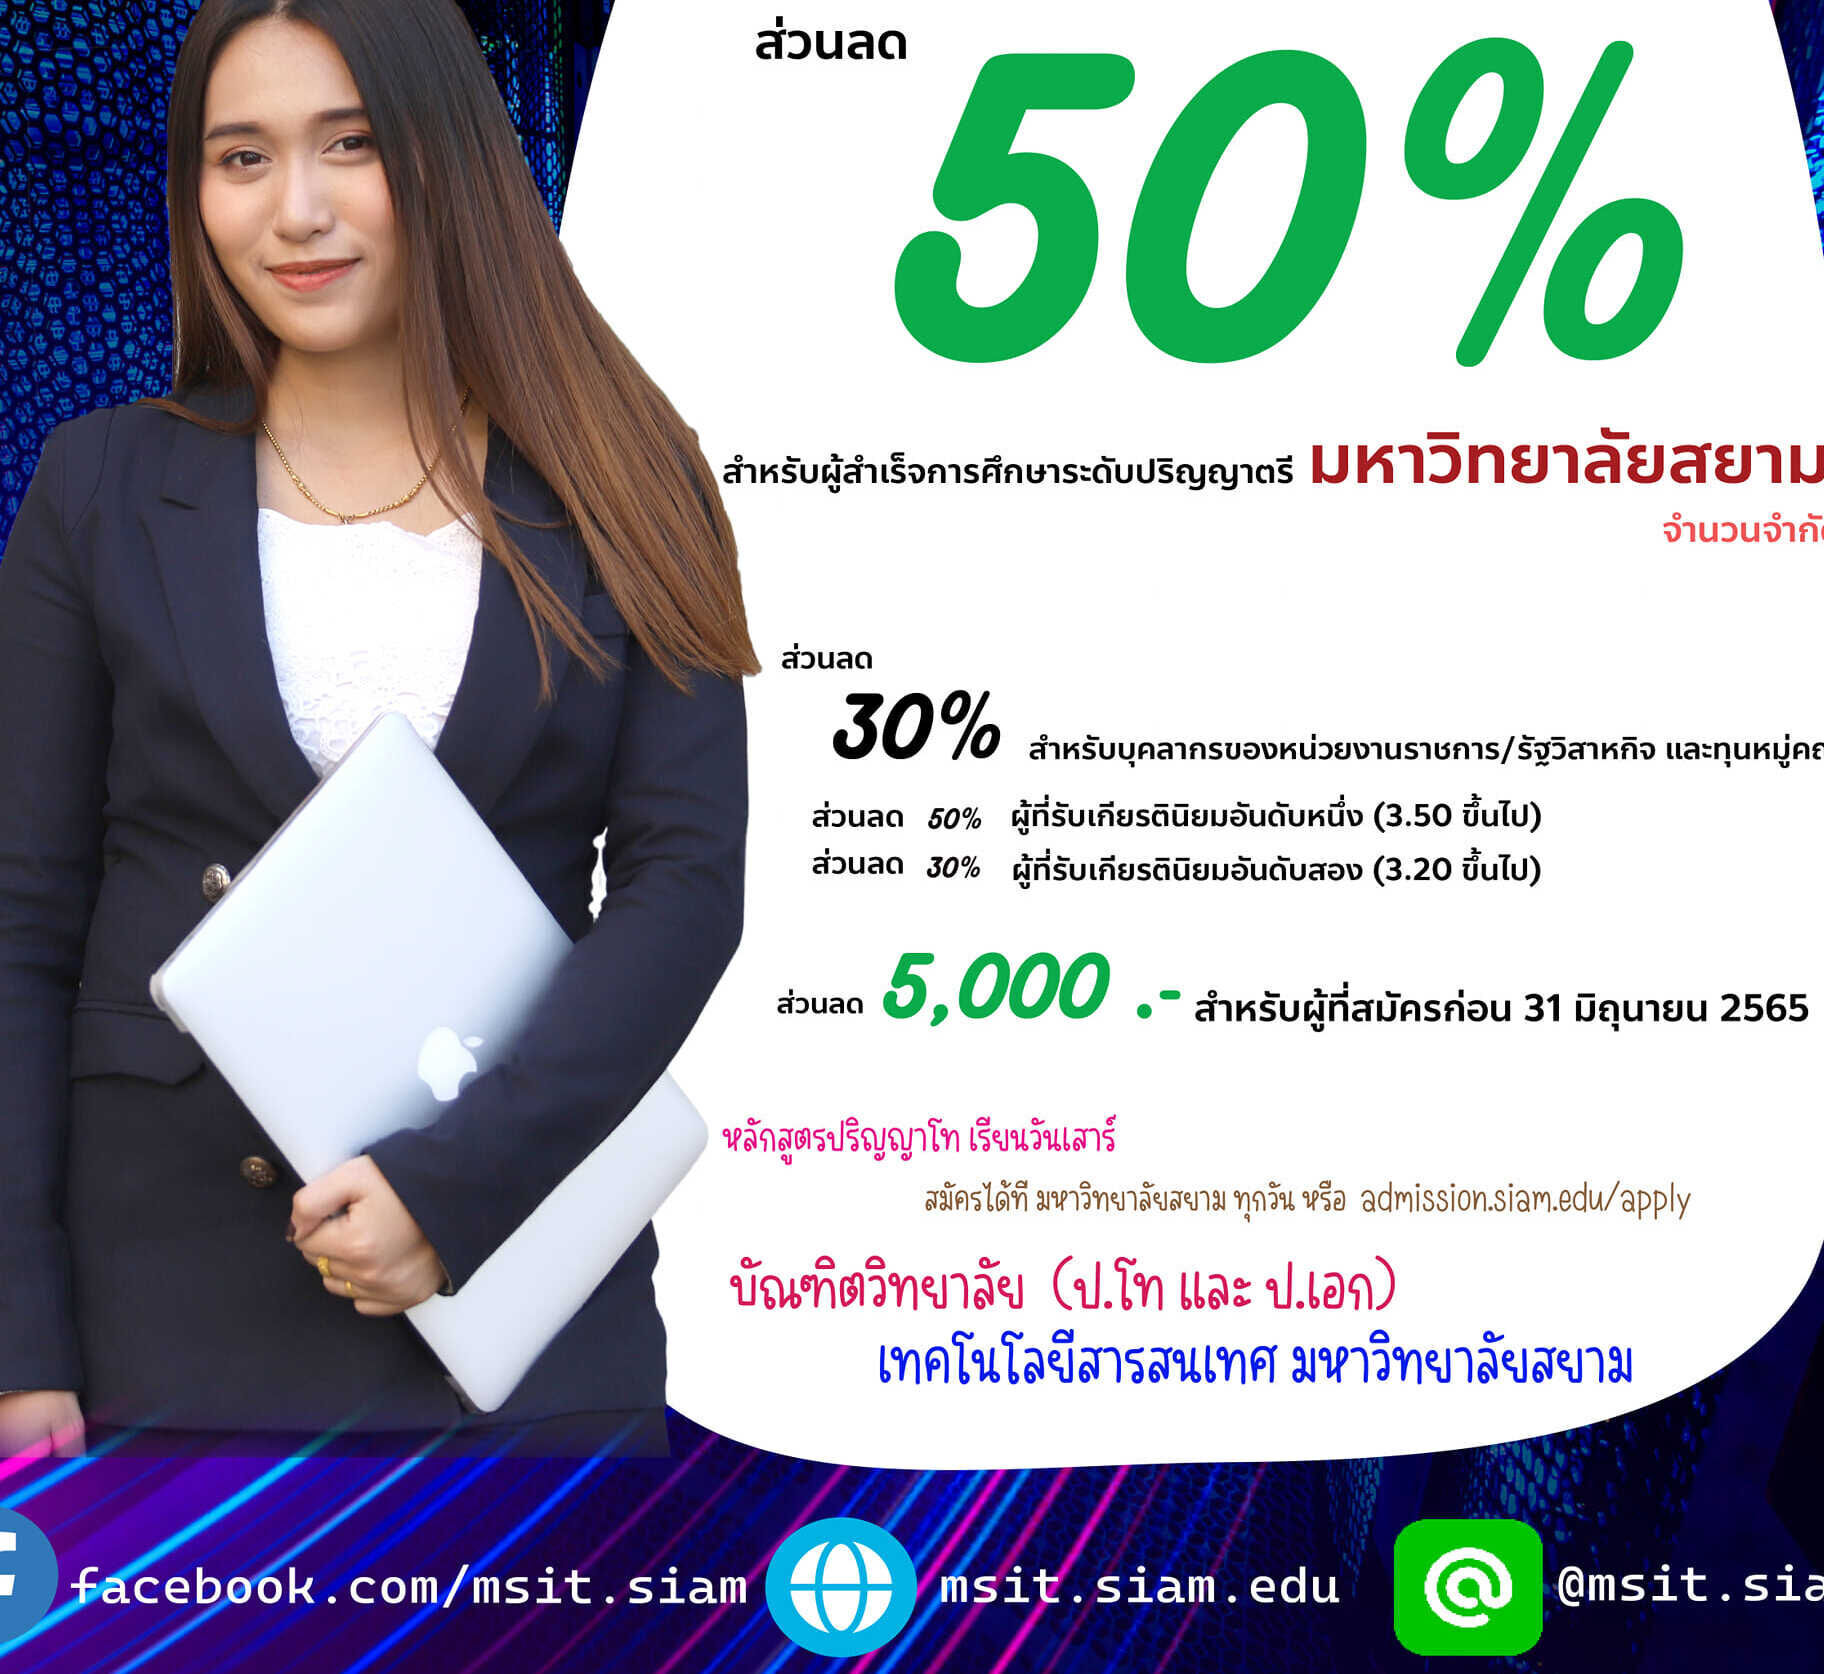 special price for Siam University graduates only.